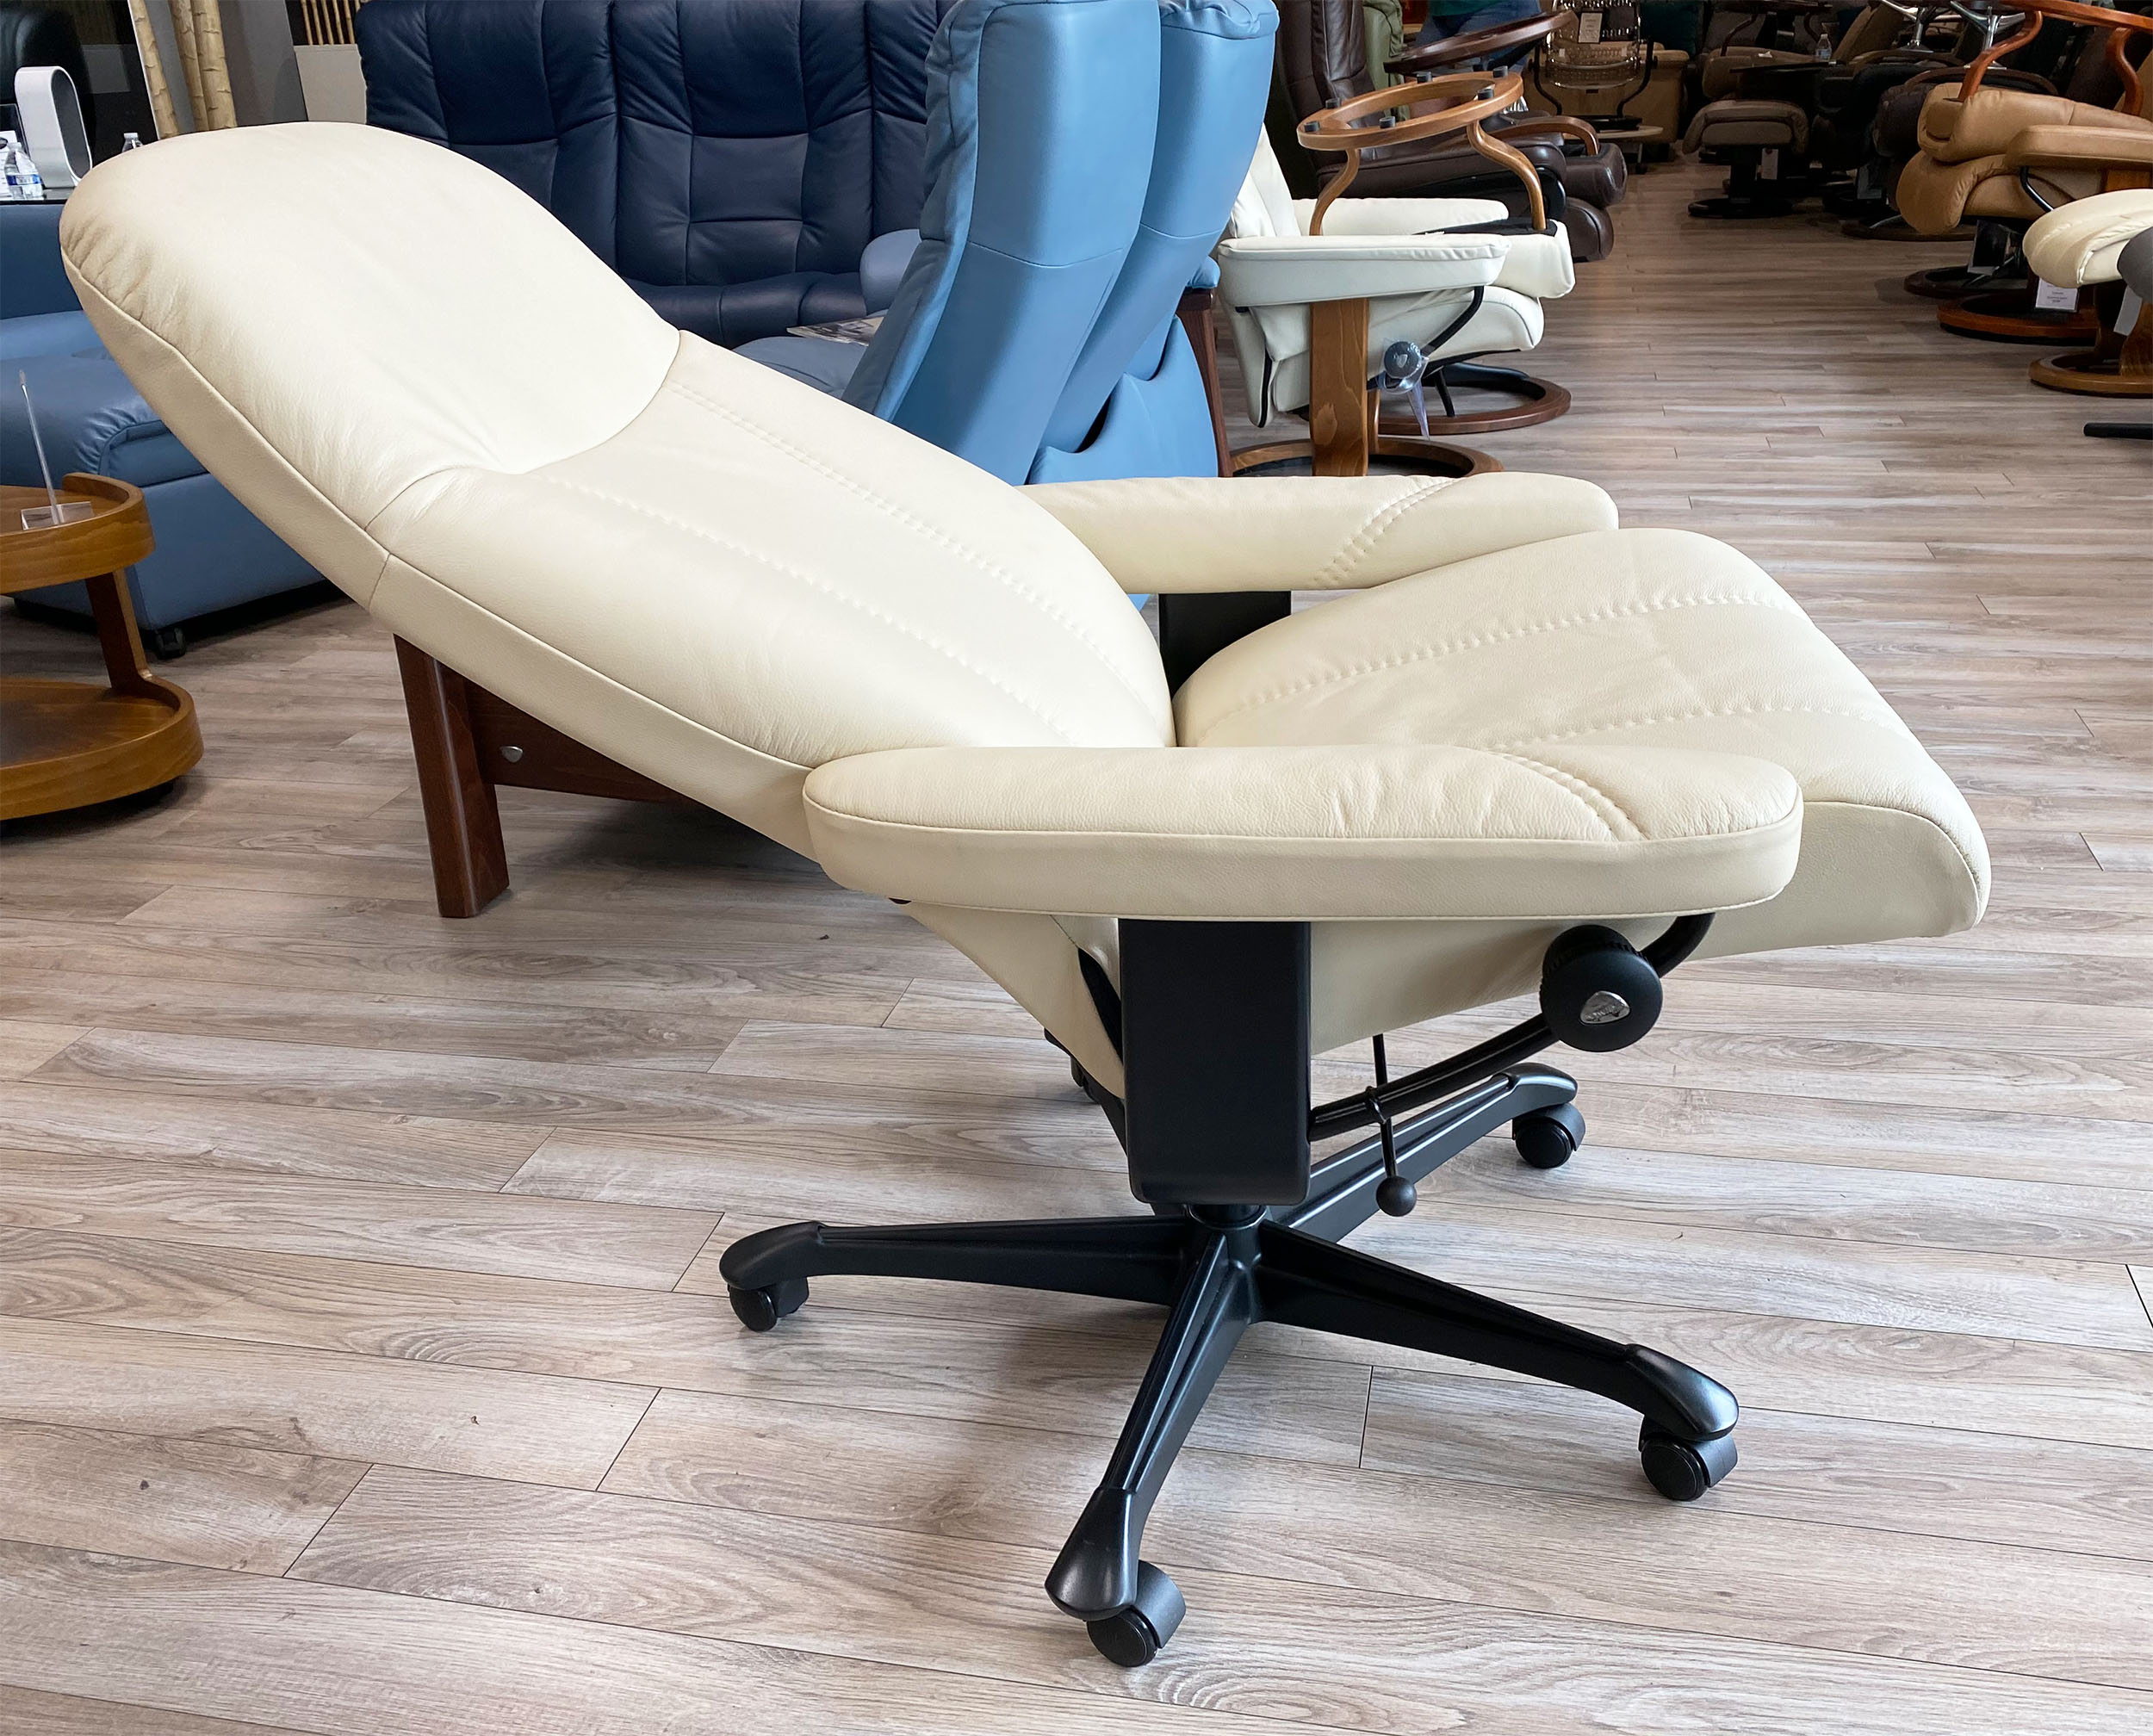 Stressless Consul Executive Office Desk Chair Recliner in Batick Cream  Leather by Ekornes